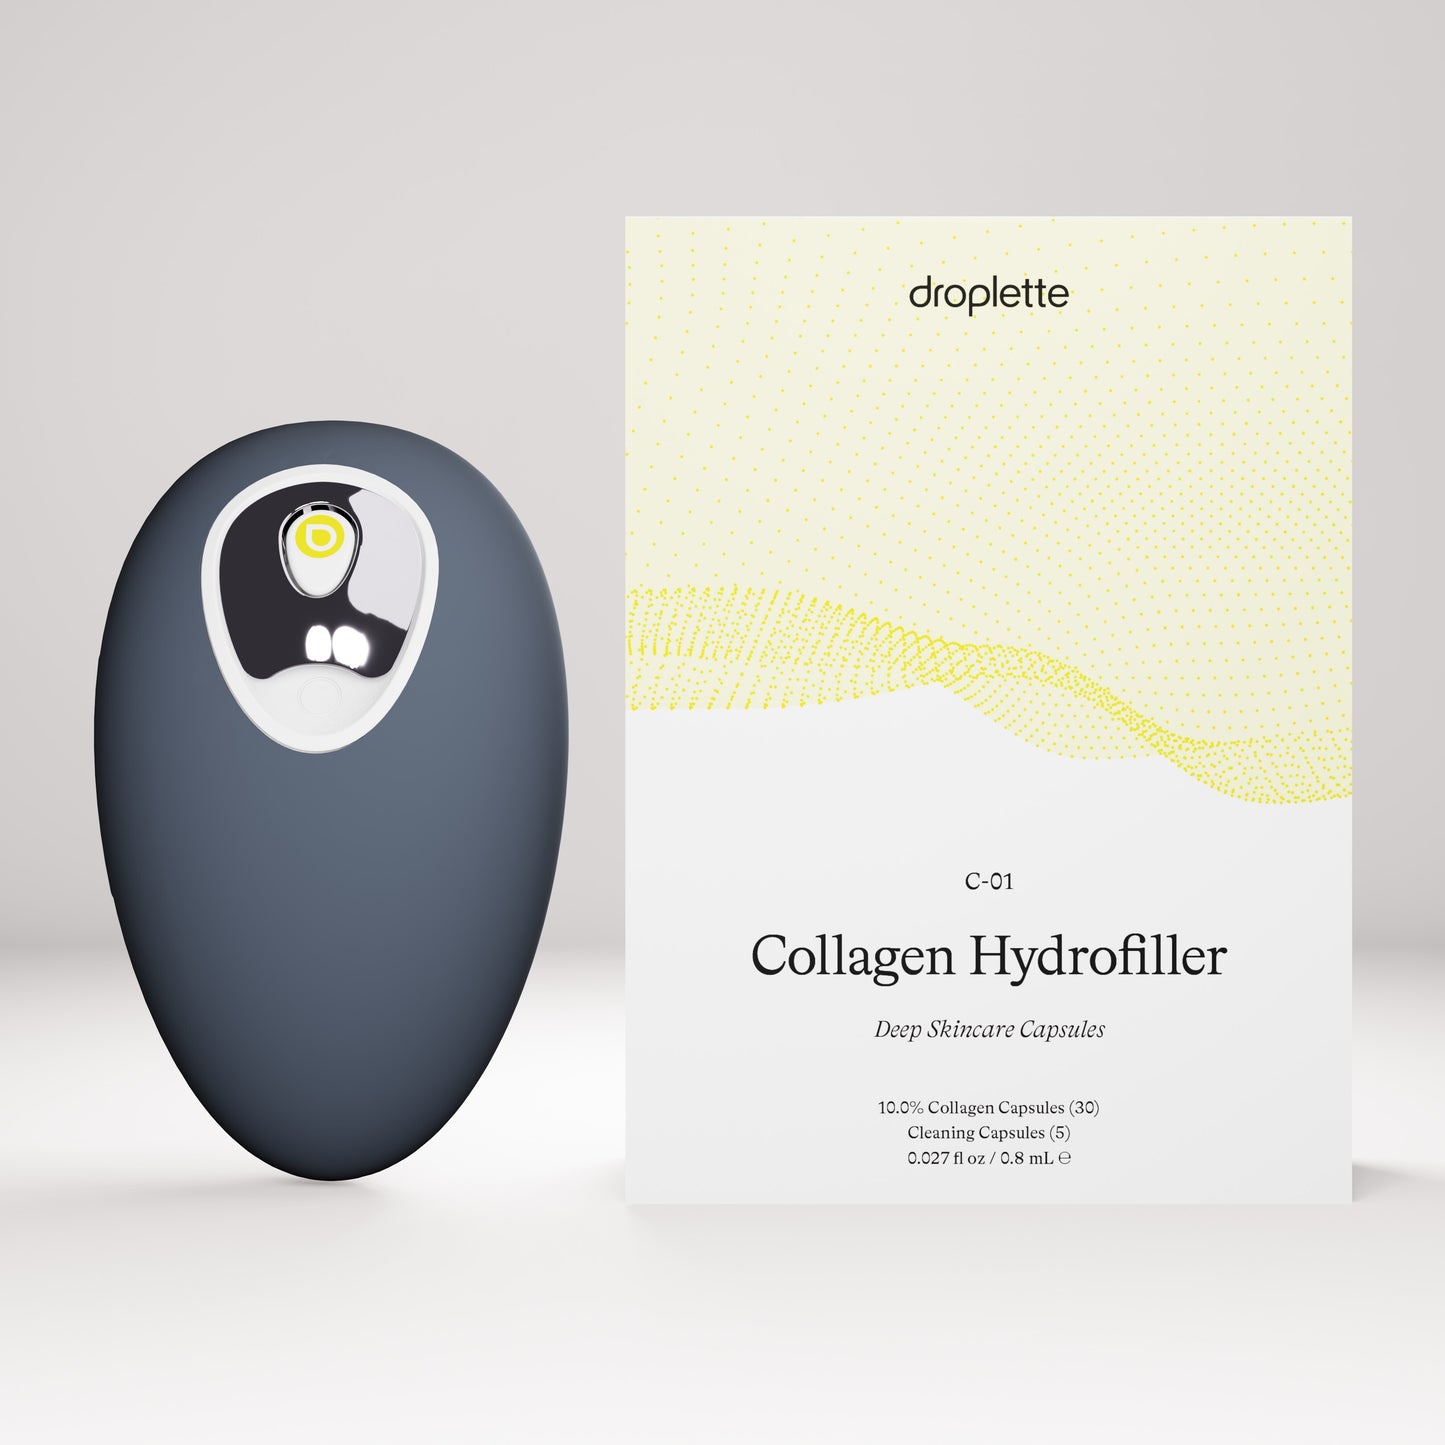 Infinity Grey Droplette Device sits beside a 30 capsule sized box of Droplette's Collagen Hydrofiller capsules